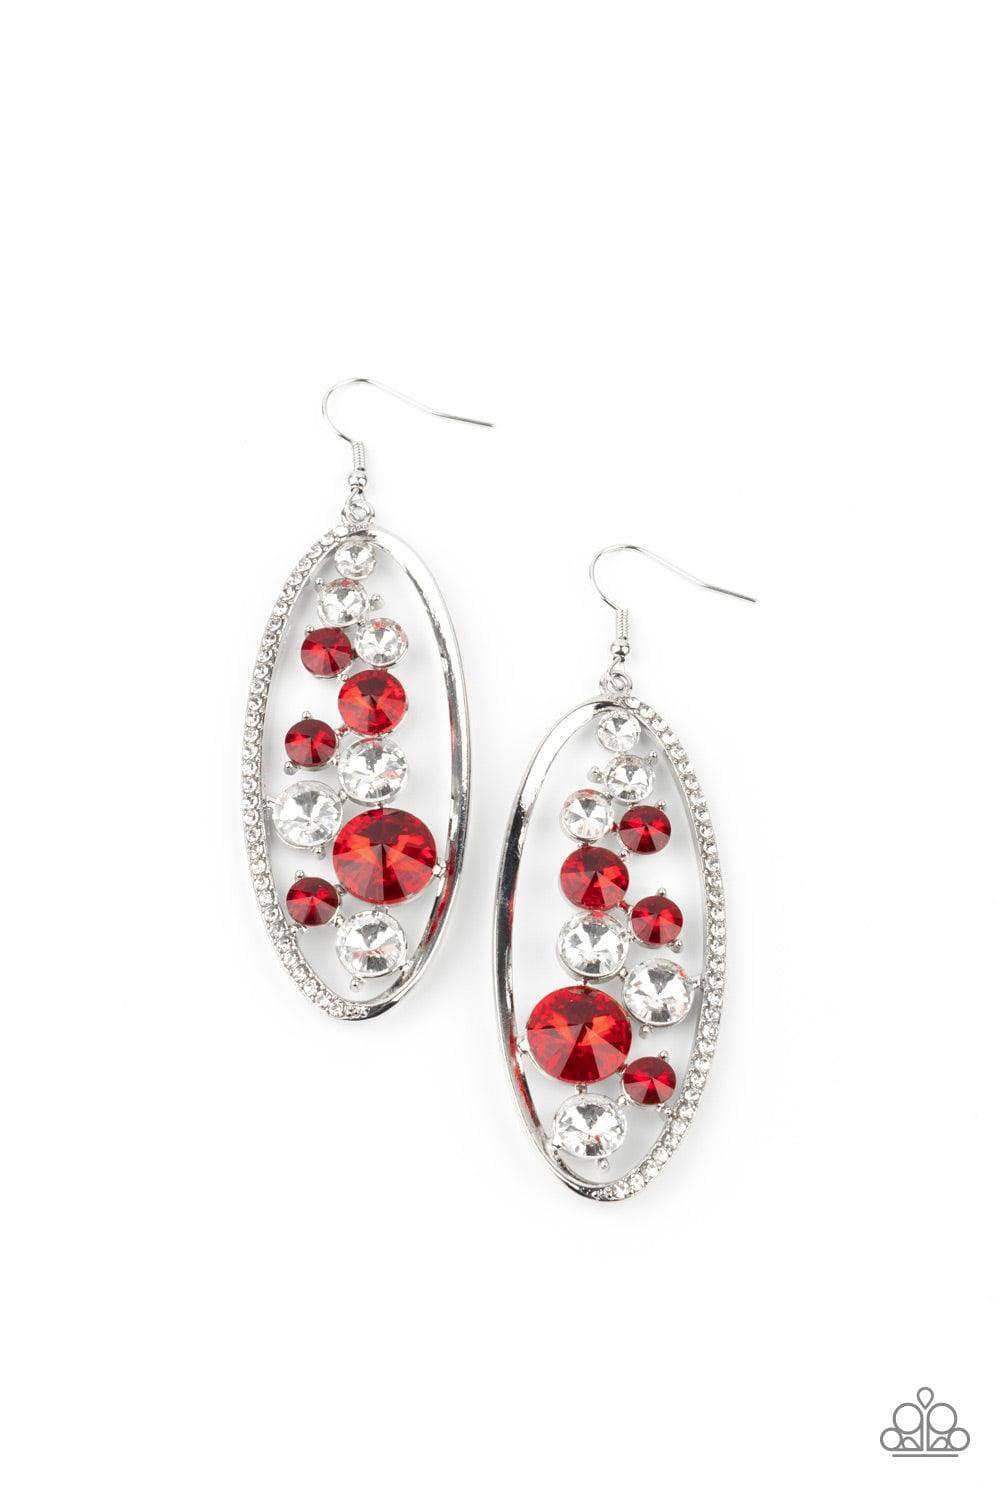 Paparazzi Accessories - Rock Candy Bubbly - Red Earrings - Bling by JessieK